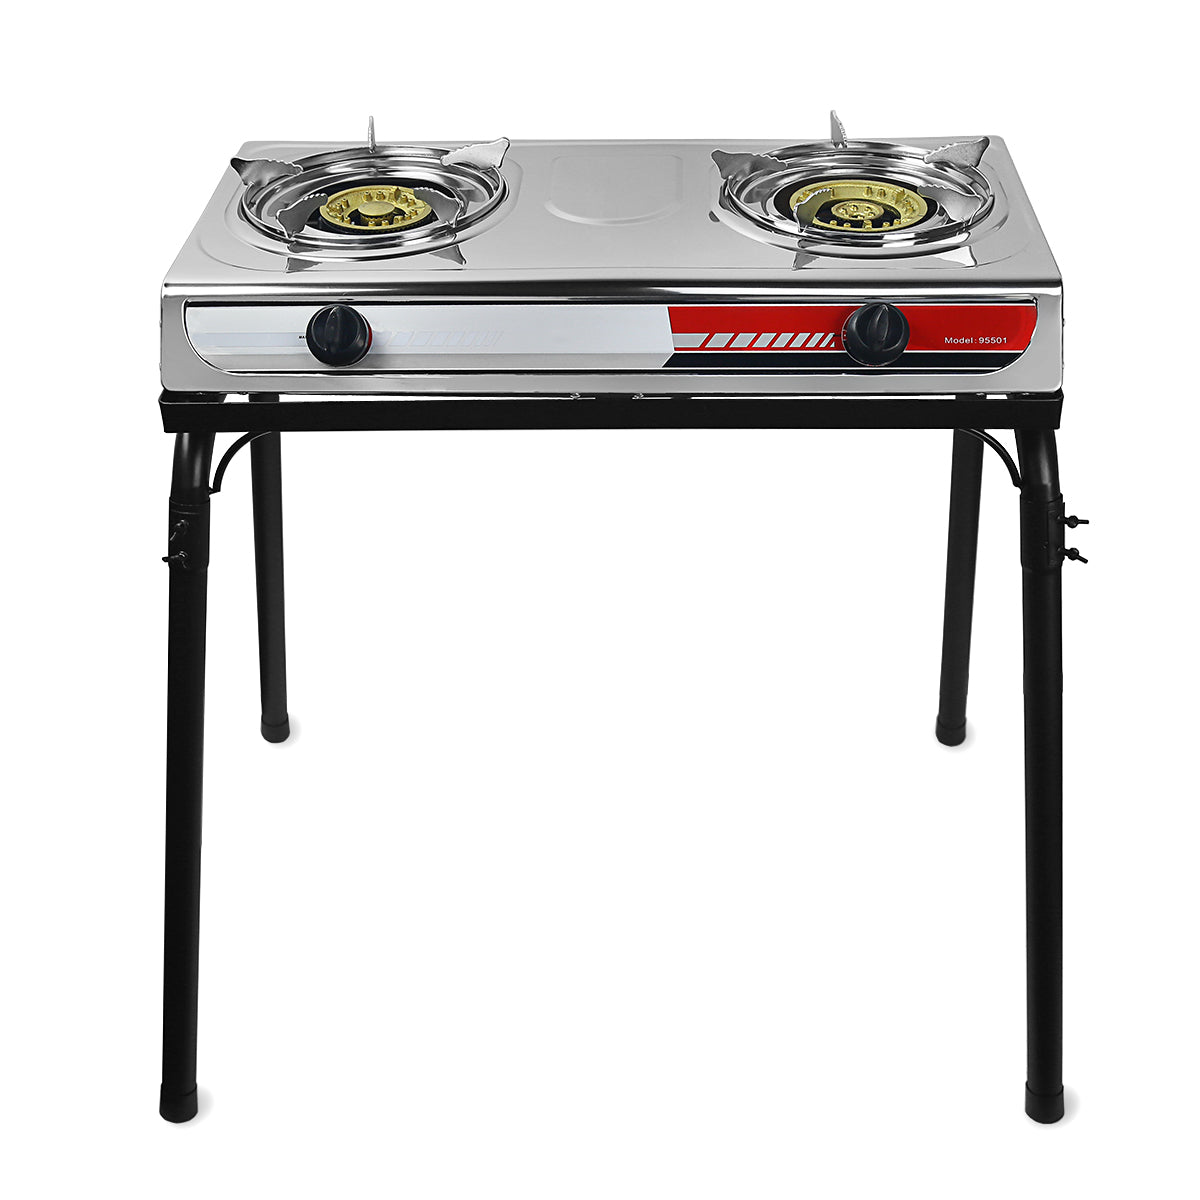 Propane Gas Cooktop 2 Burners Stove portable gas stove Tempered Glass  Double Auto Ignition Camping Burner LPG for RV, Apartments, Outdoor